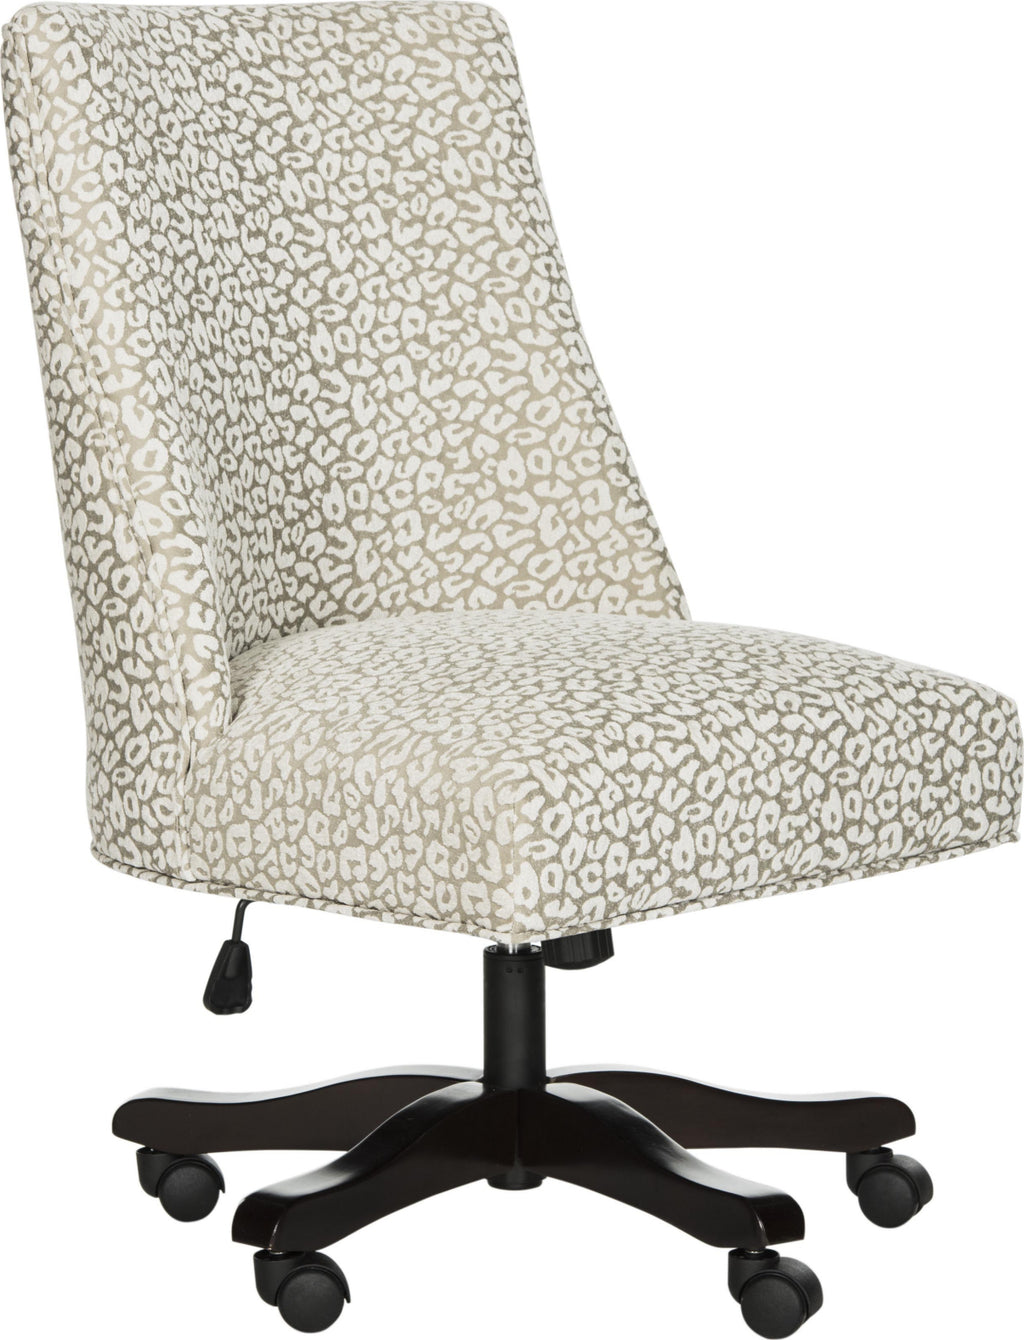 Safavieh Scarlet Desk Chair White and Light Ginger  Feature